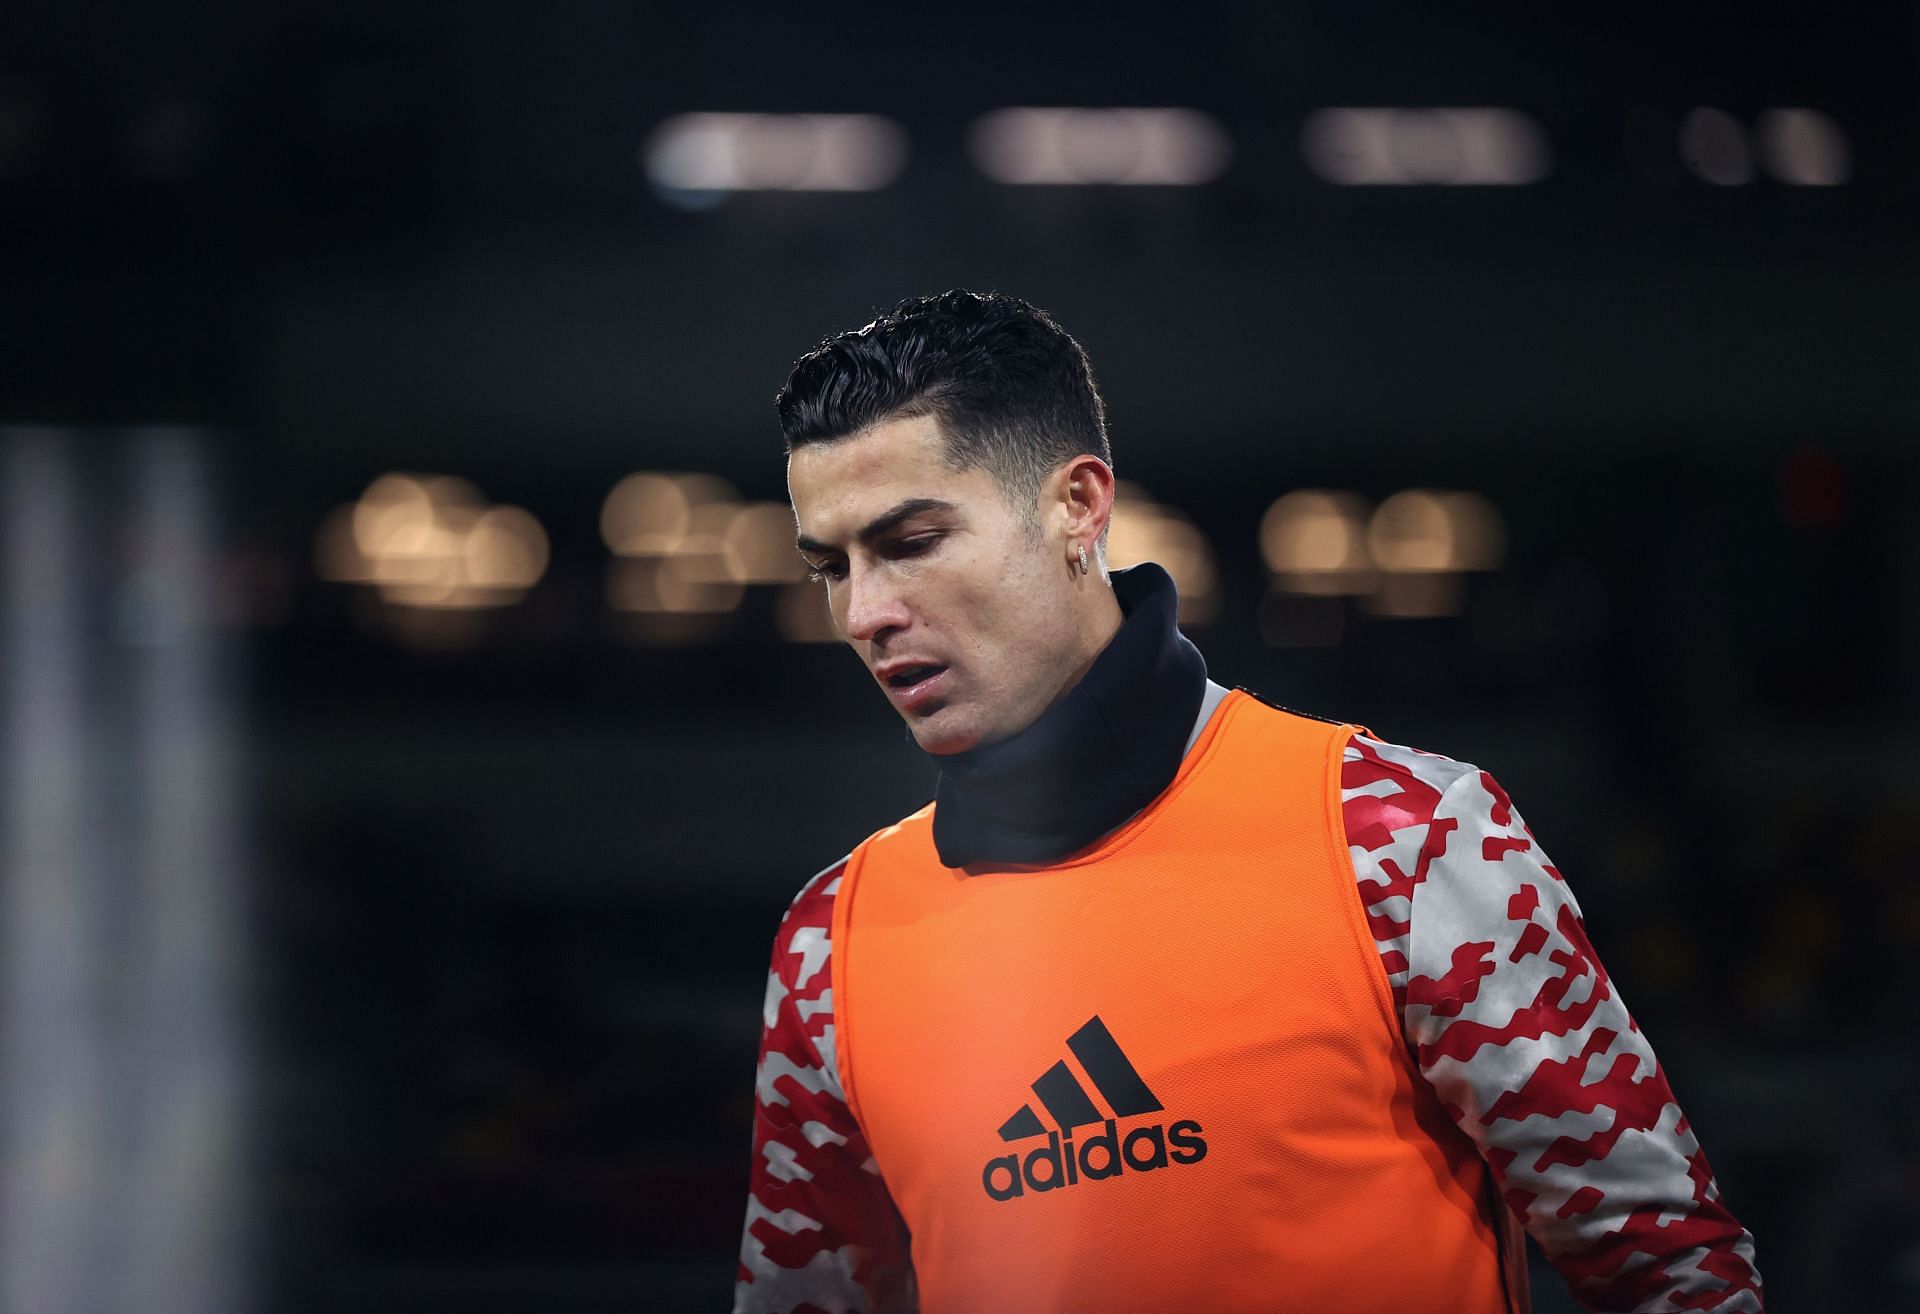 Cristiano Ronaldo warms up ahead of the game against Brentford in the Premier League